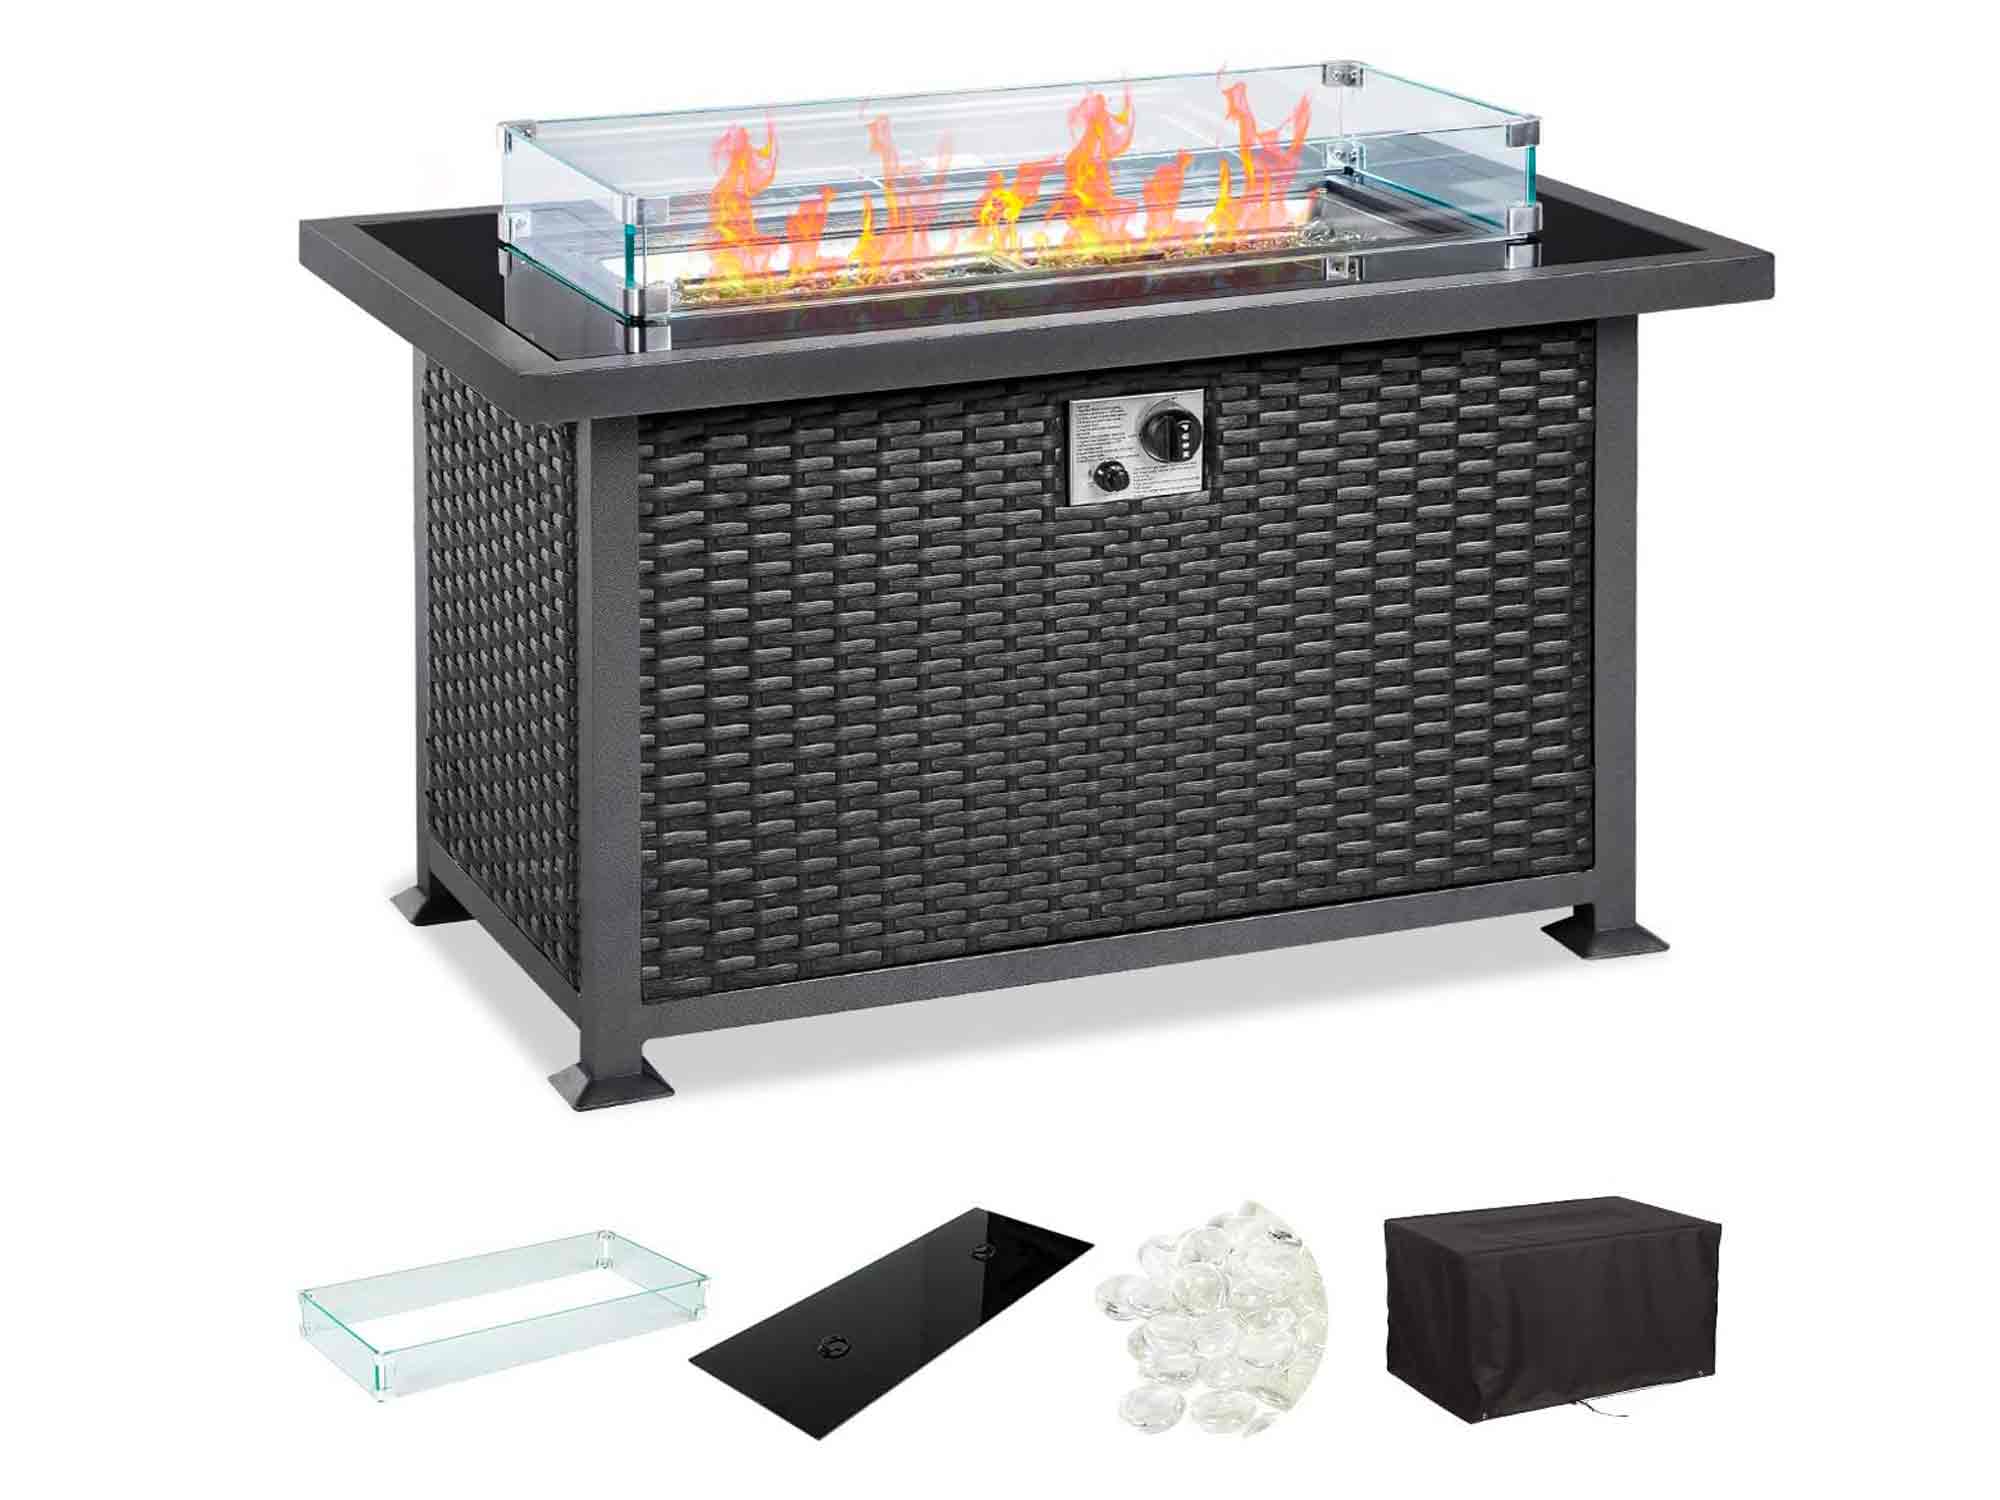 U-MAX 44in Outdoor Propane Gas Fire Pit Table, 50,000 BTU Auto-Ignition Gas Firepit with Glass Wind Guard, Black Tempered Glass Tabletop & Clear Glass Rock, Black PE Rattan, CSA Certification